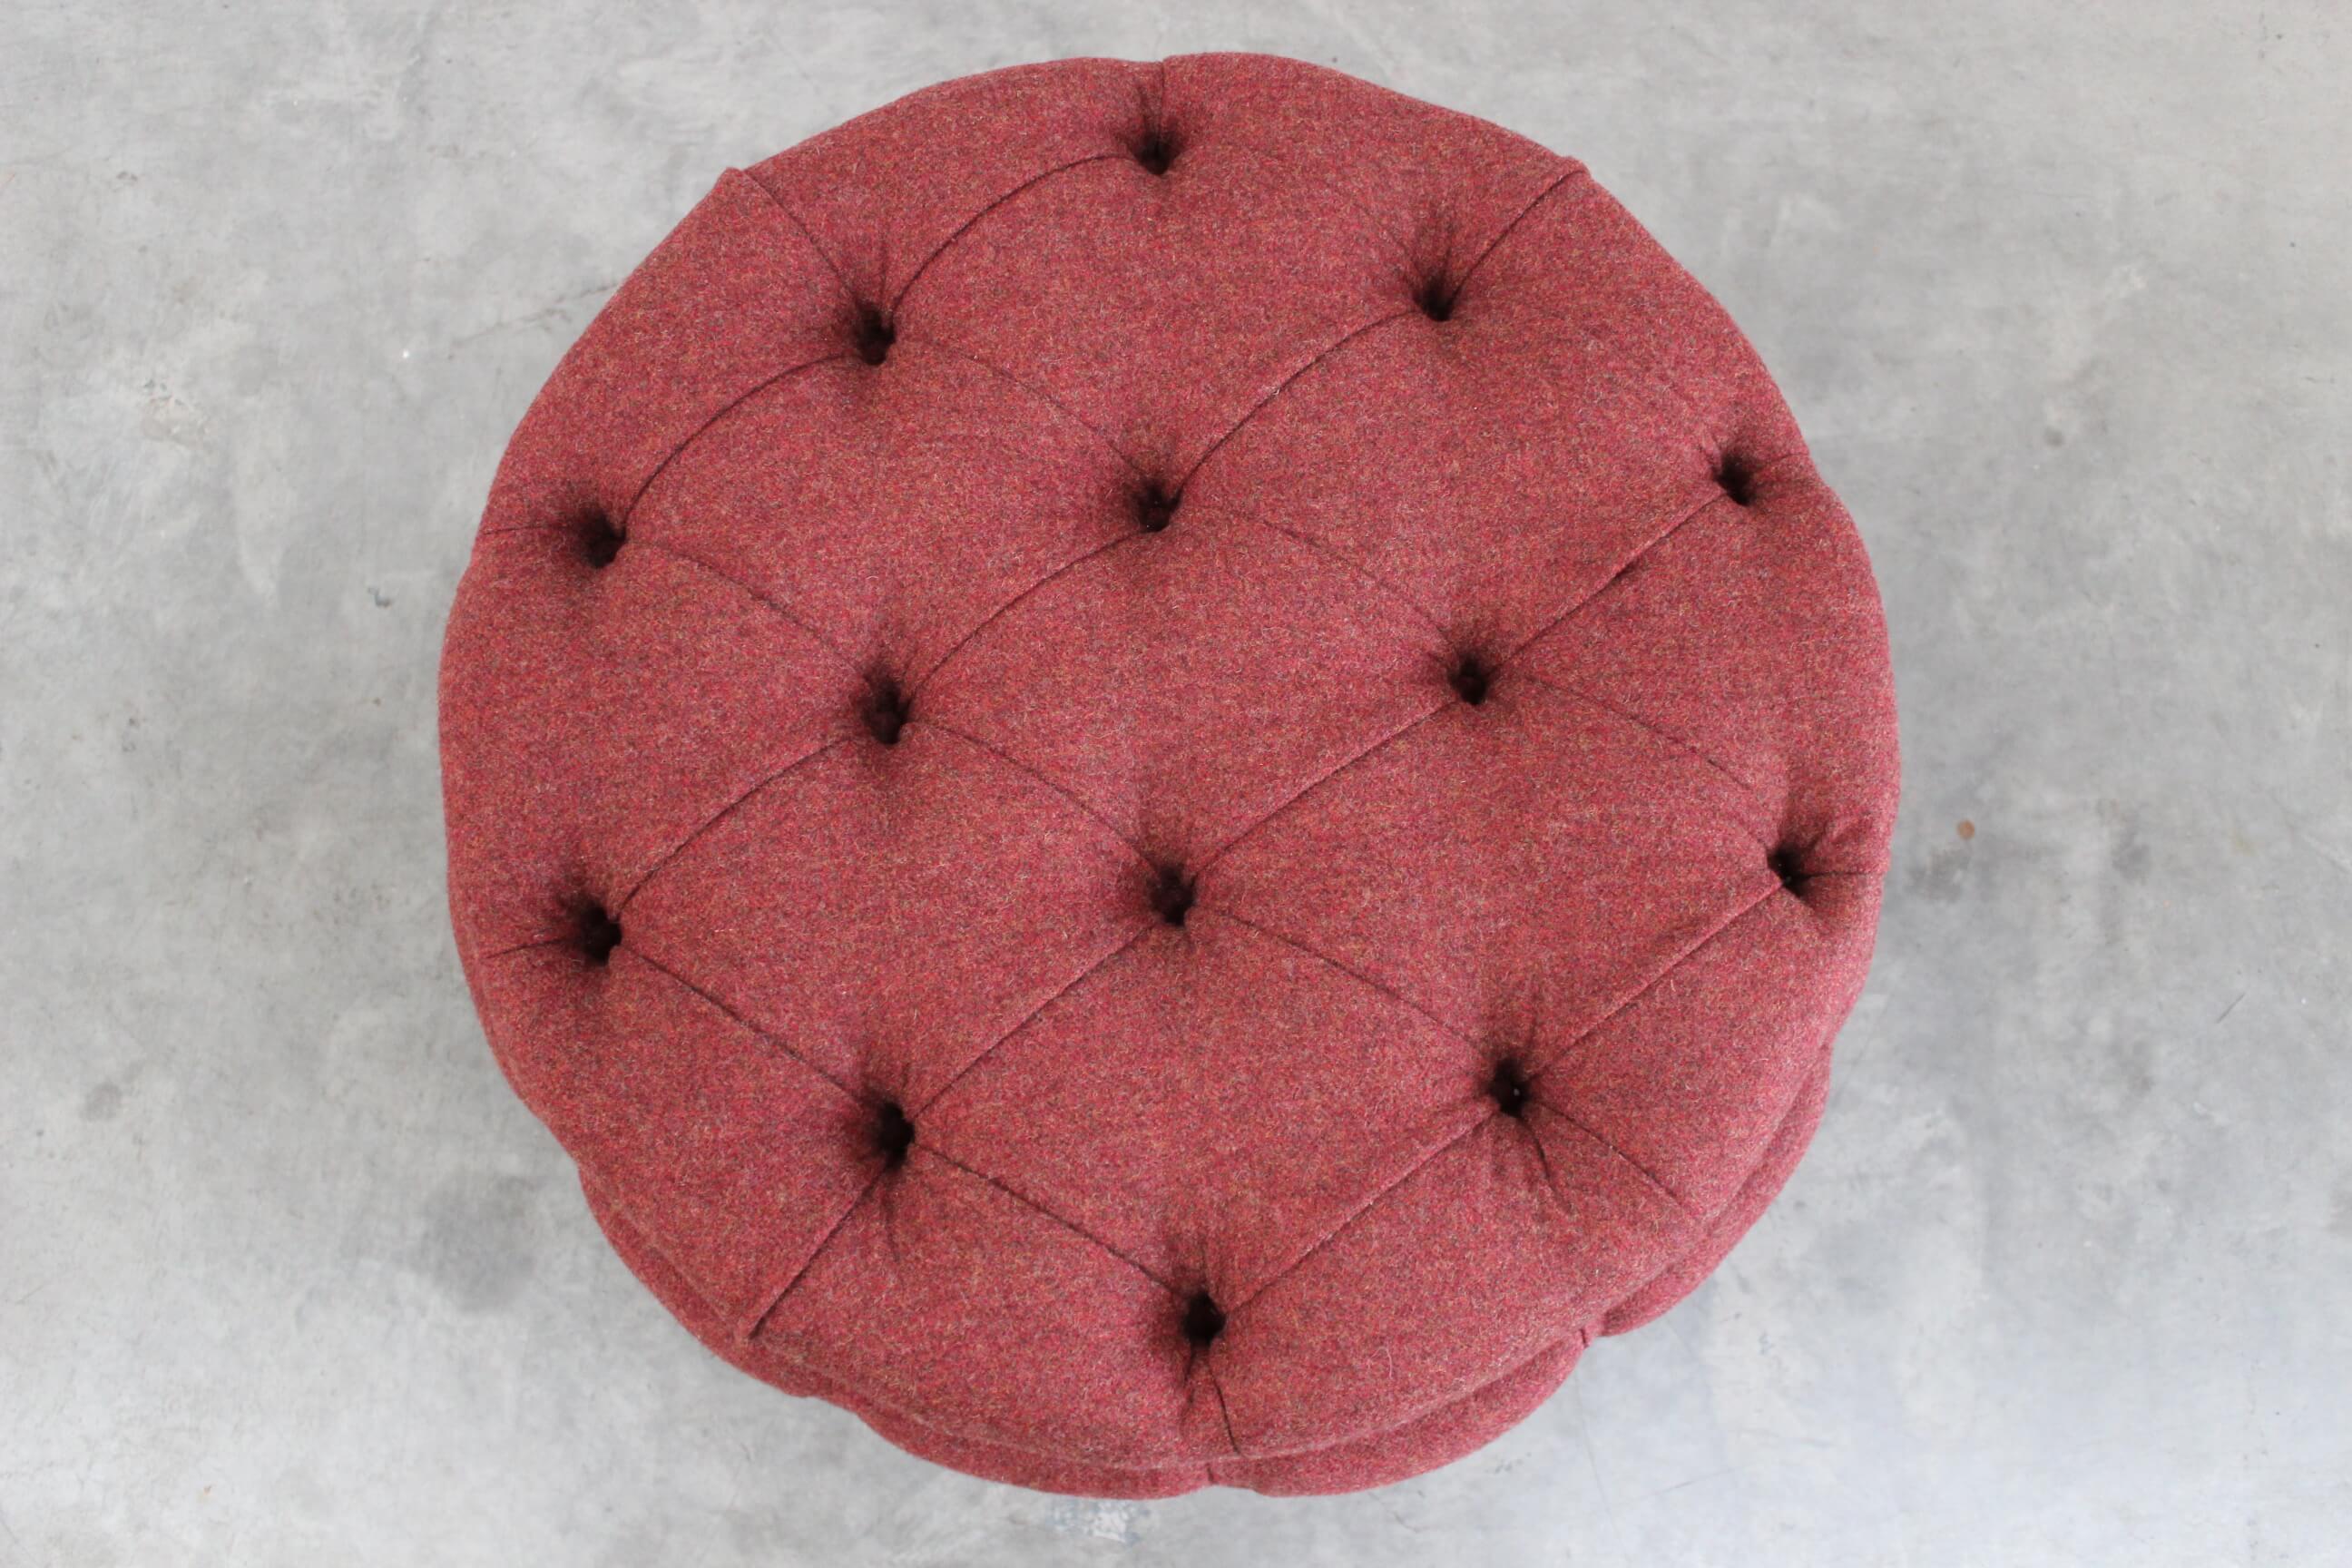 Mint “Soho Baby Buttoned-Drum” Ottoman Footstool in Mulberry Wool In Good Condition For Sale In Barrowford, GB